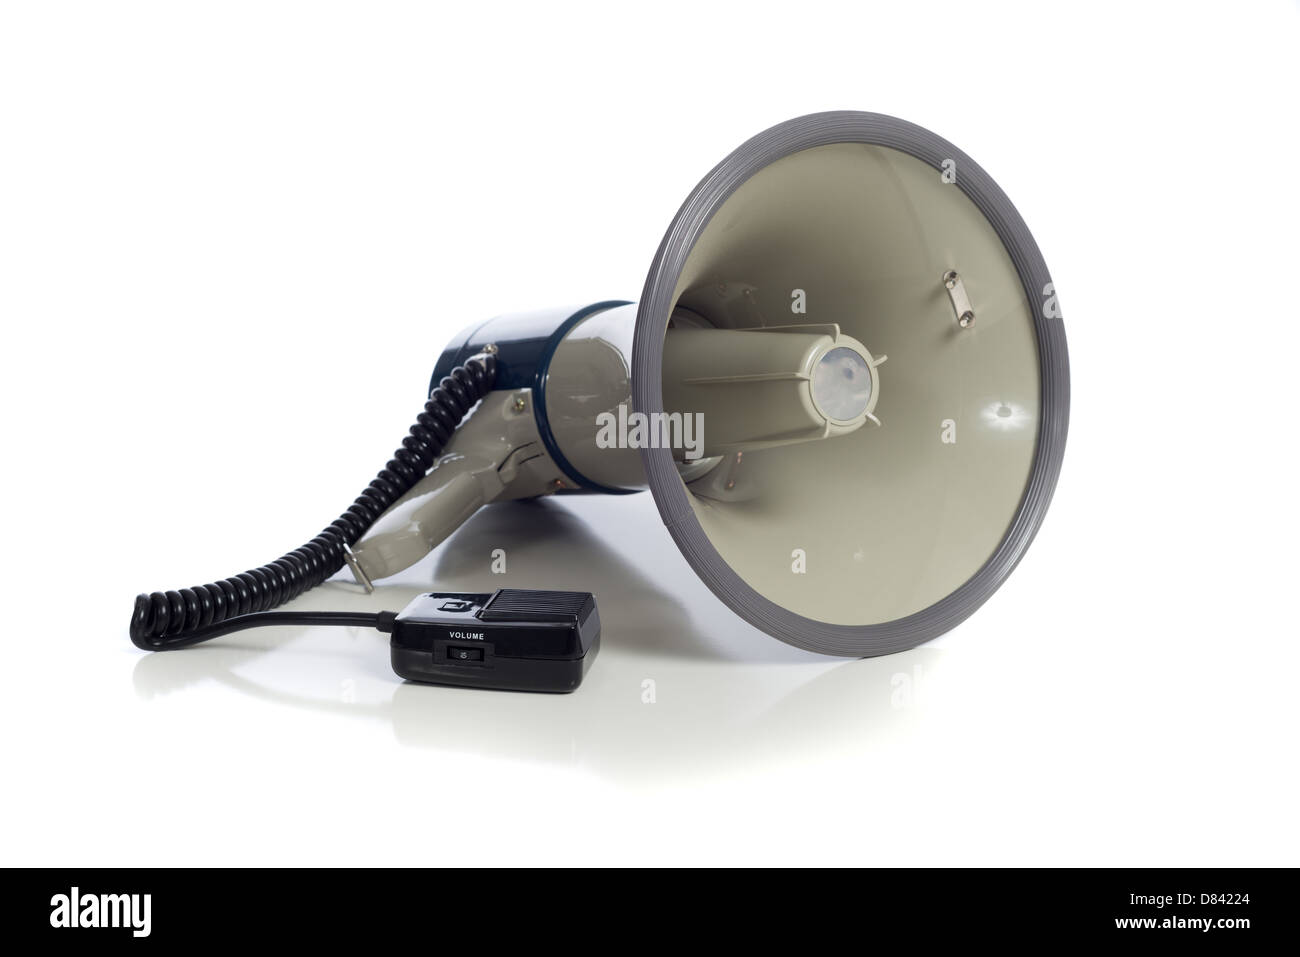 A gray bullhorn/megaphone on a white background Stock Photo